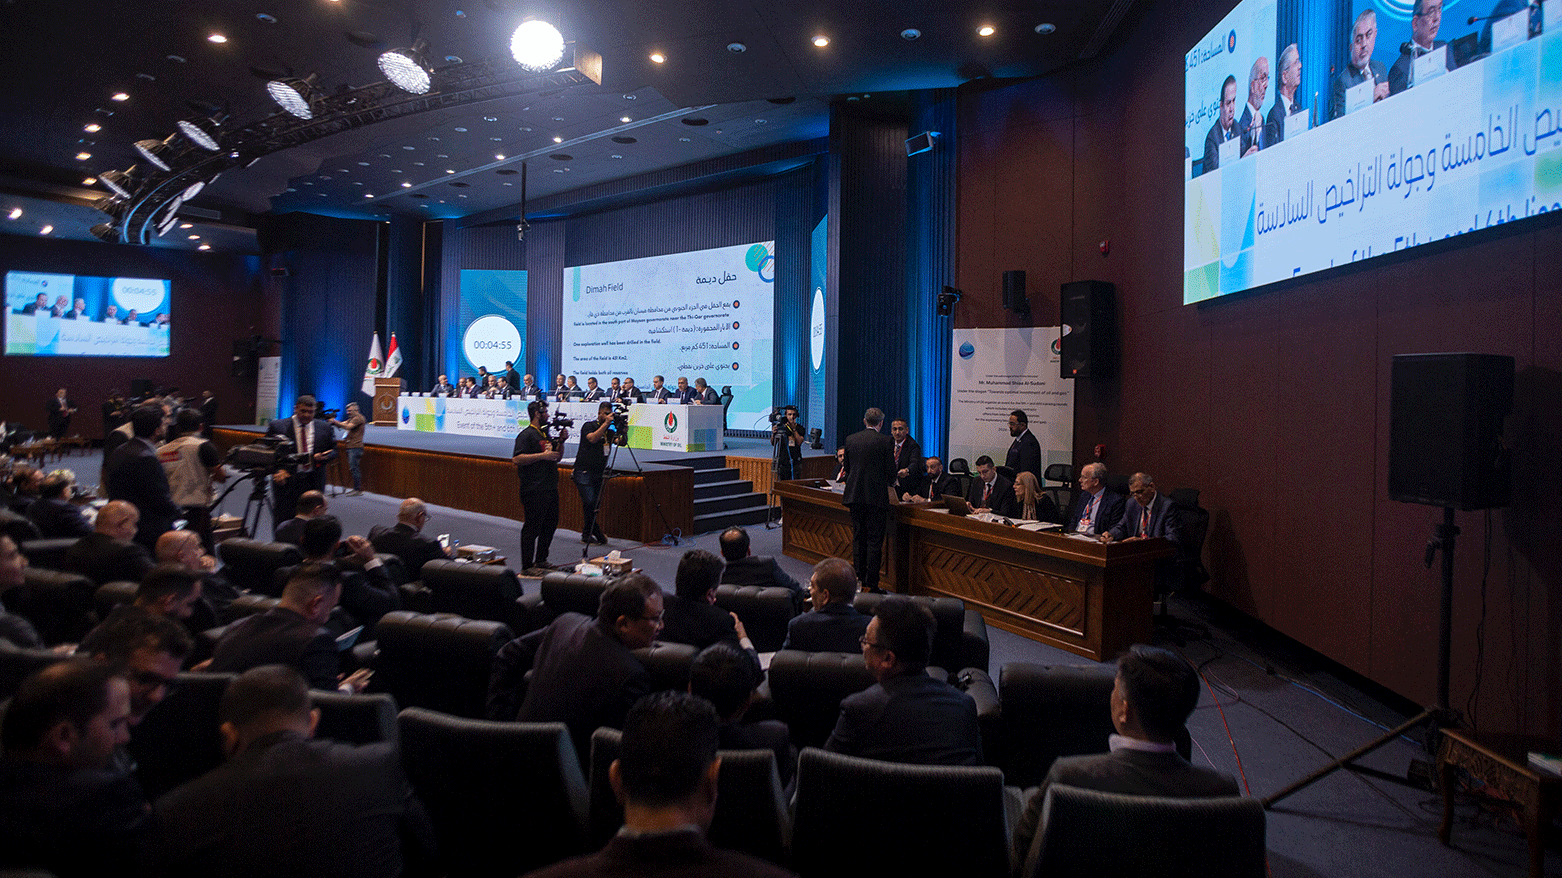 KRG Council of Ministers enacts measures to enhance financial stability and citizen welfare